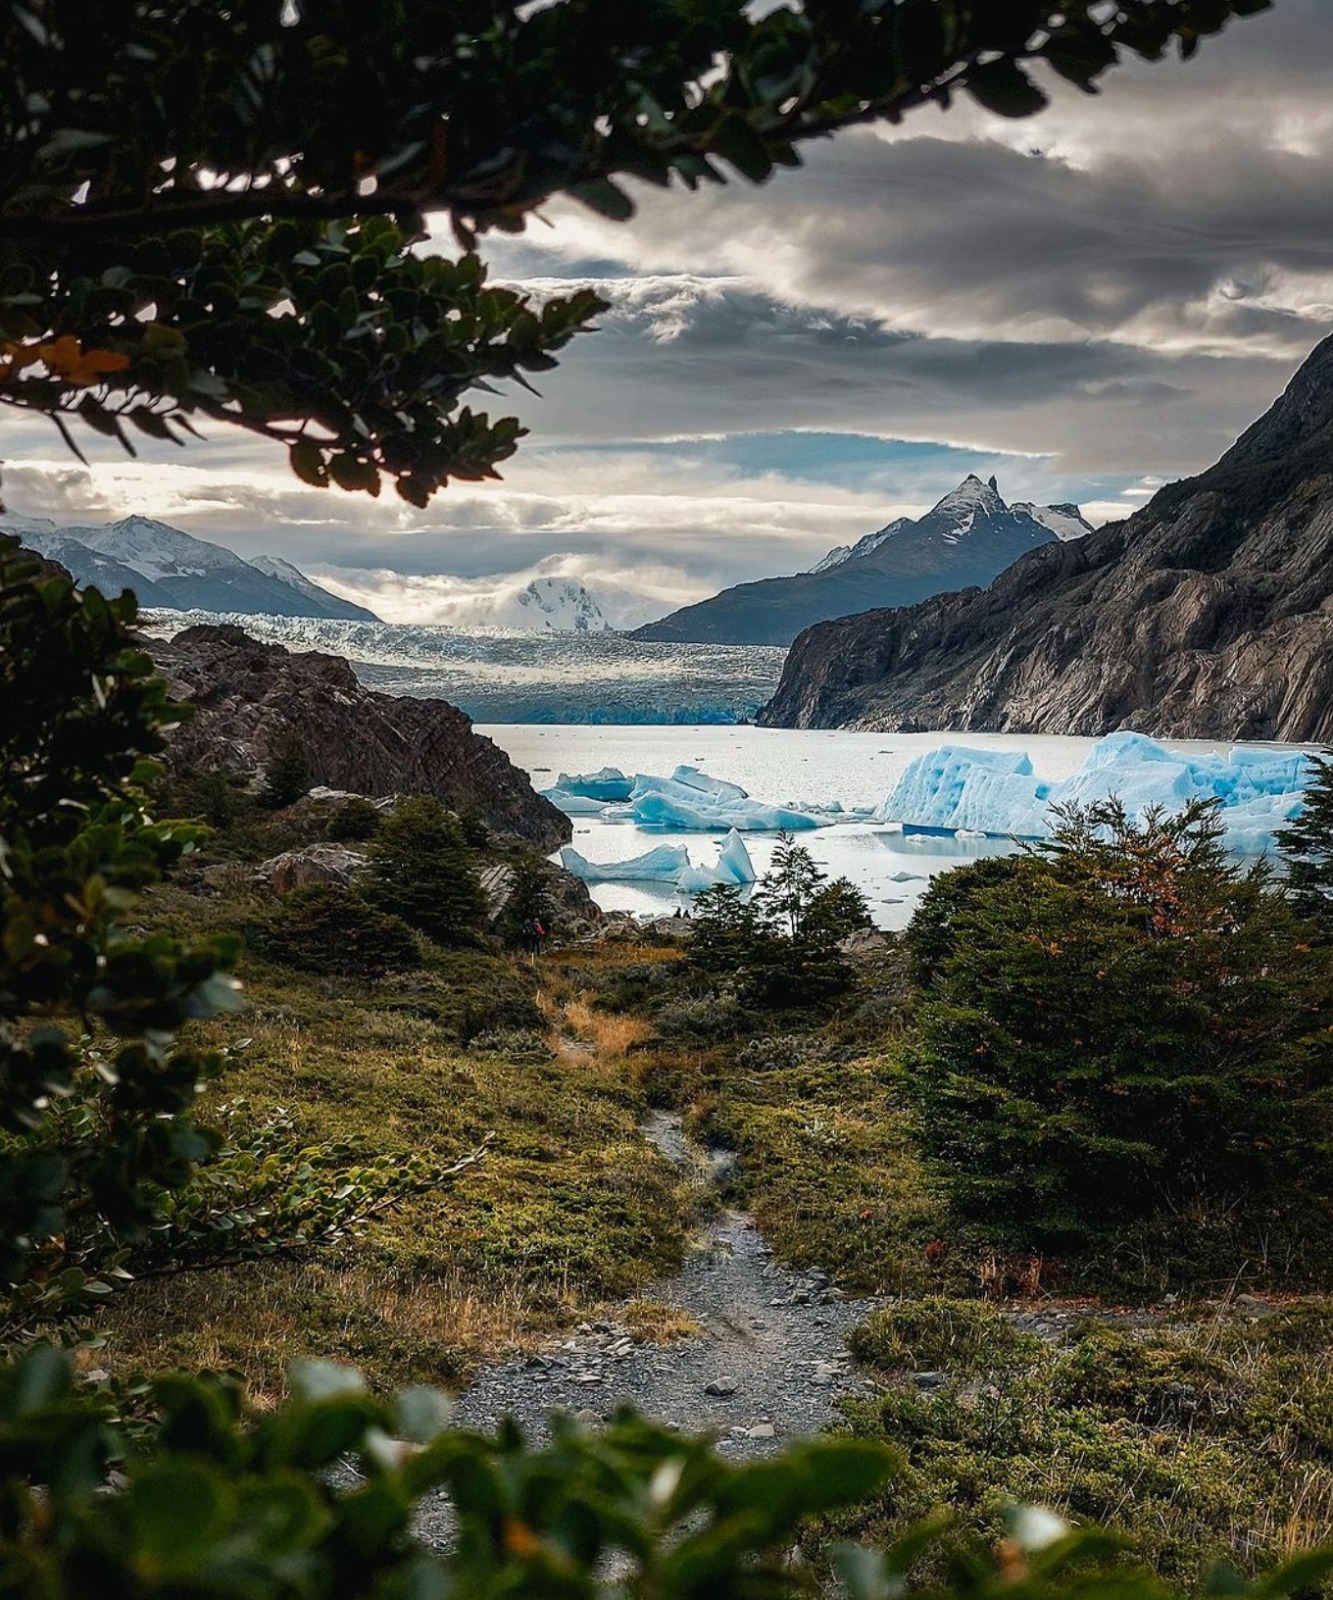 Las Torres Patagonia's First Photography Contest Closes with Over 500 Participants